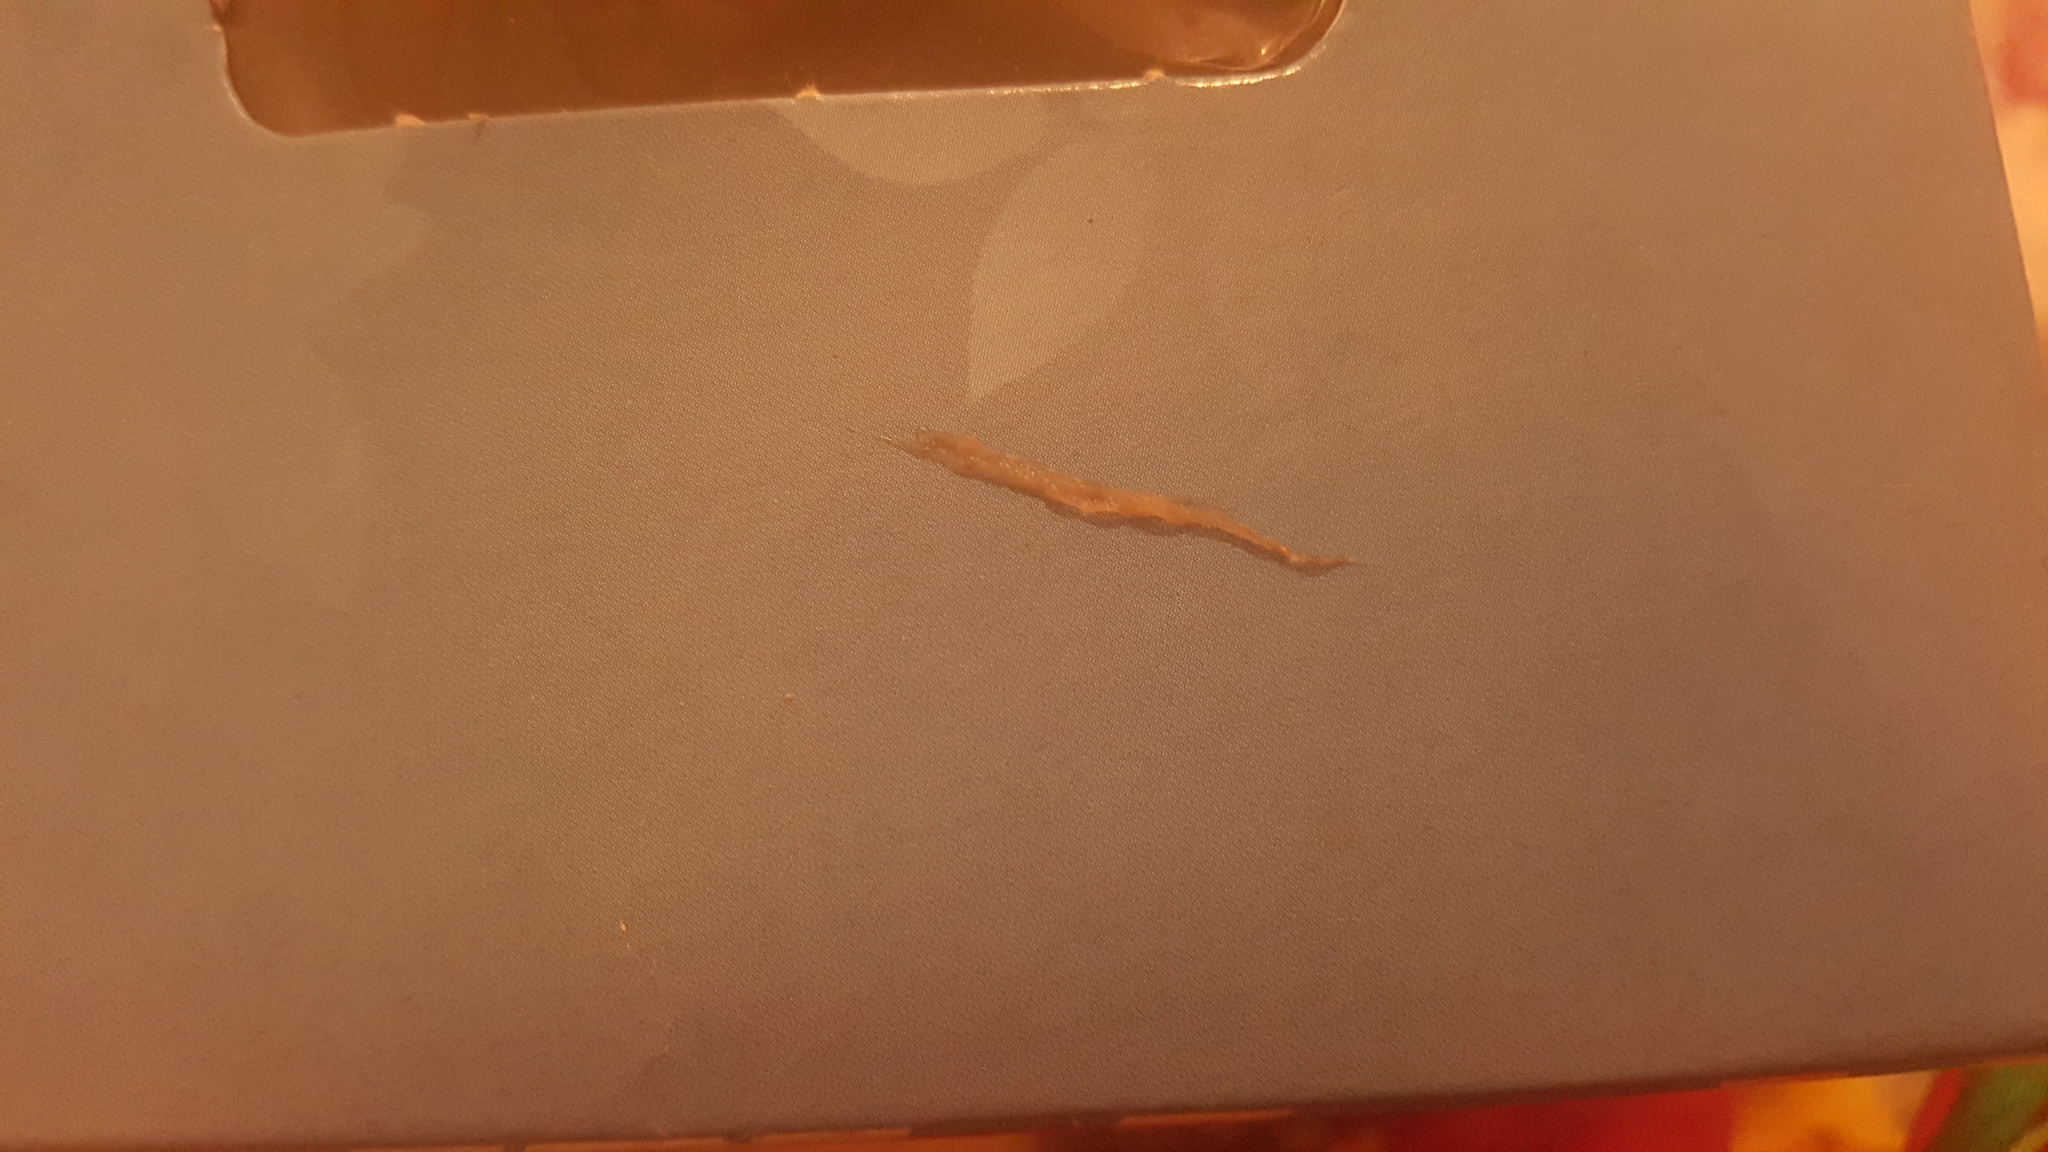 My eye has been feeling really irritated for the past two days, and I just pulled this out from under my top eyelid, no idea what it is...